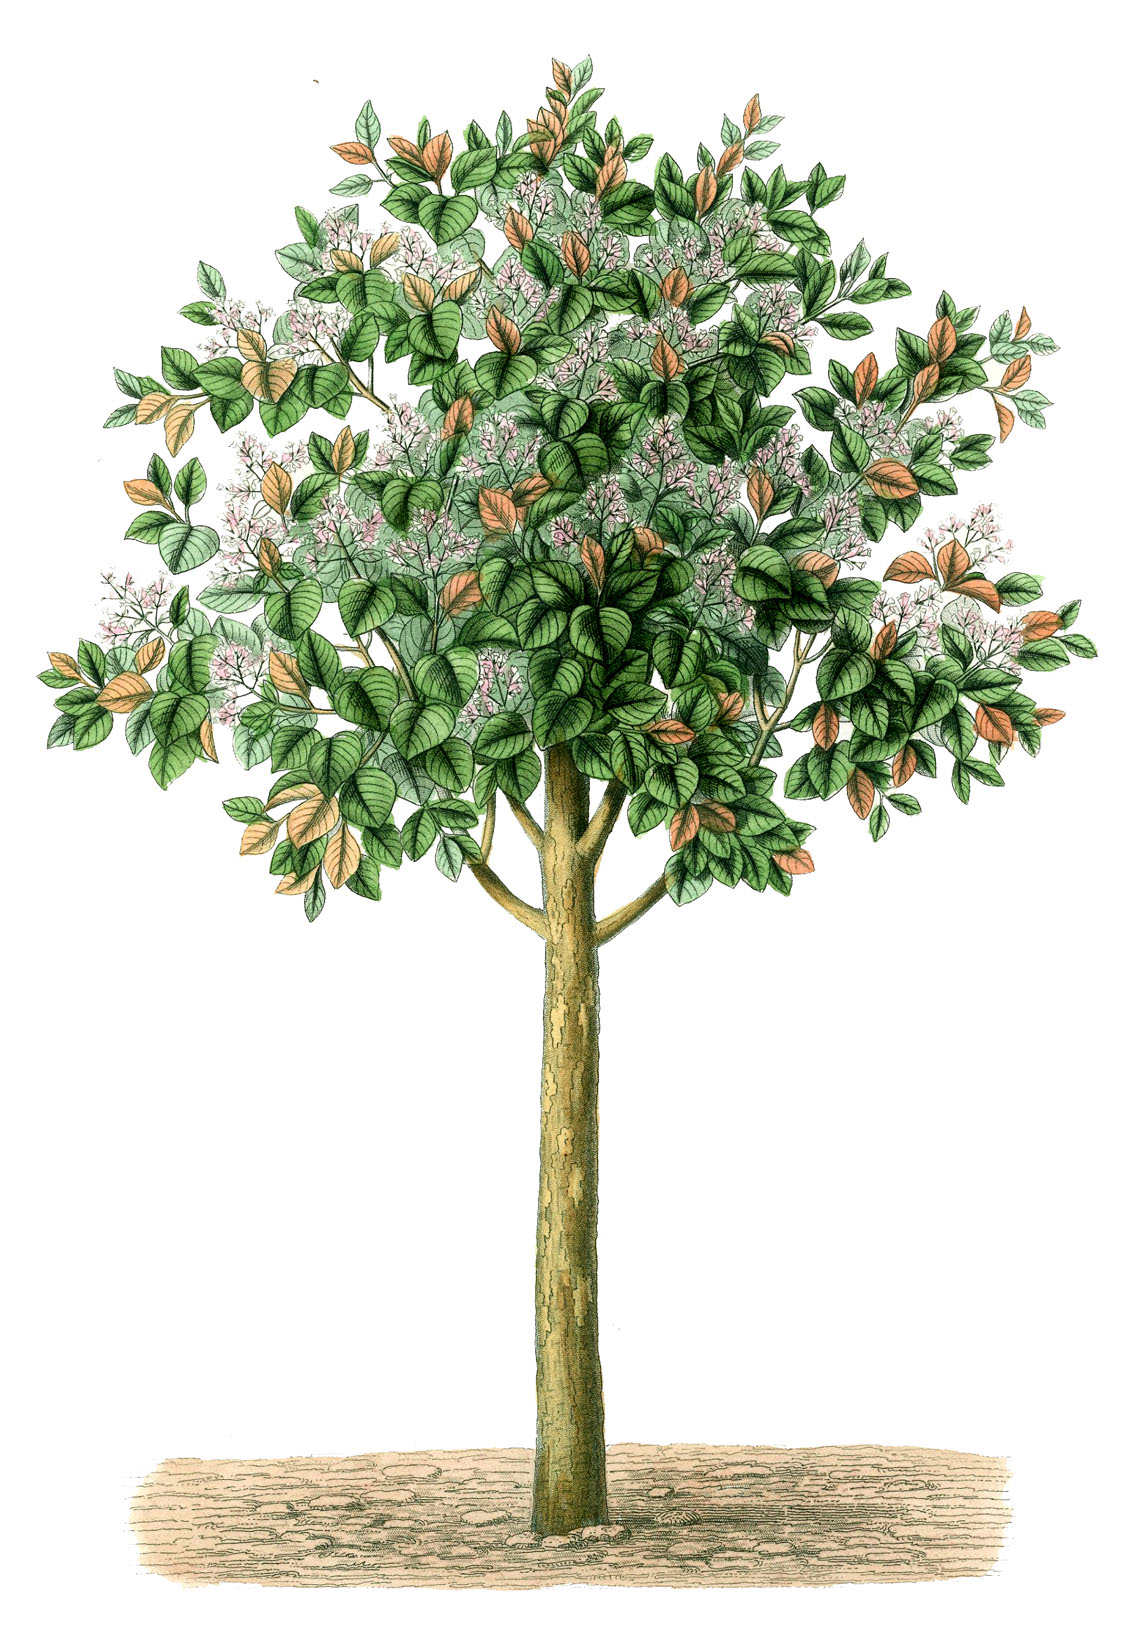 the Quinine Tree; its bark is source of natural hydroxycholoriquine